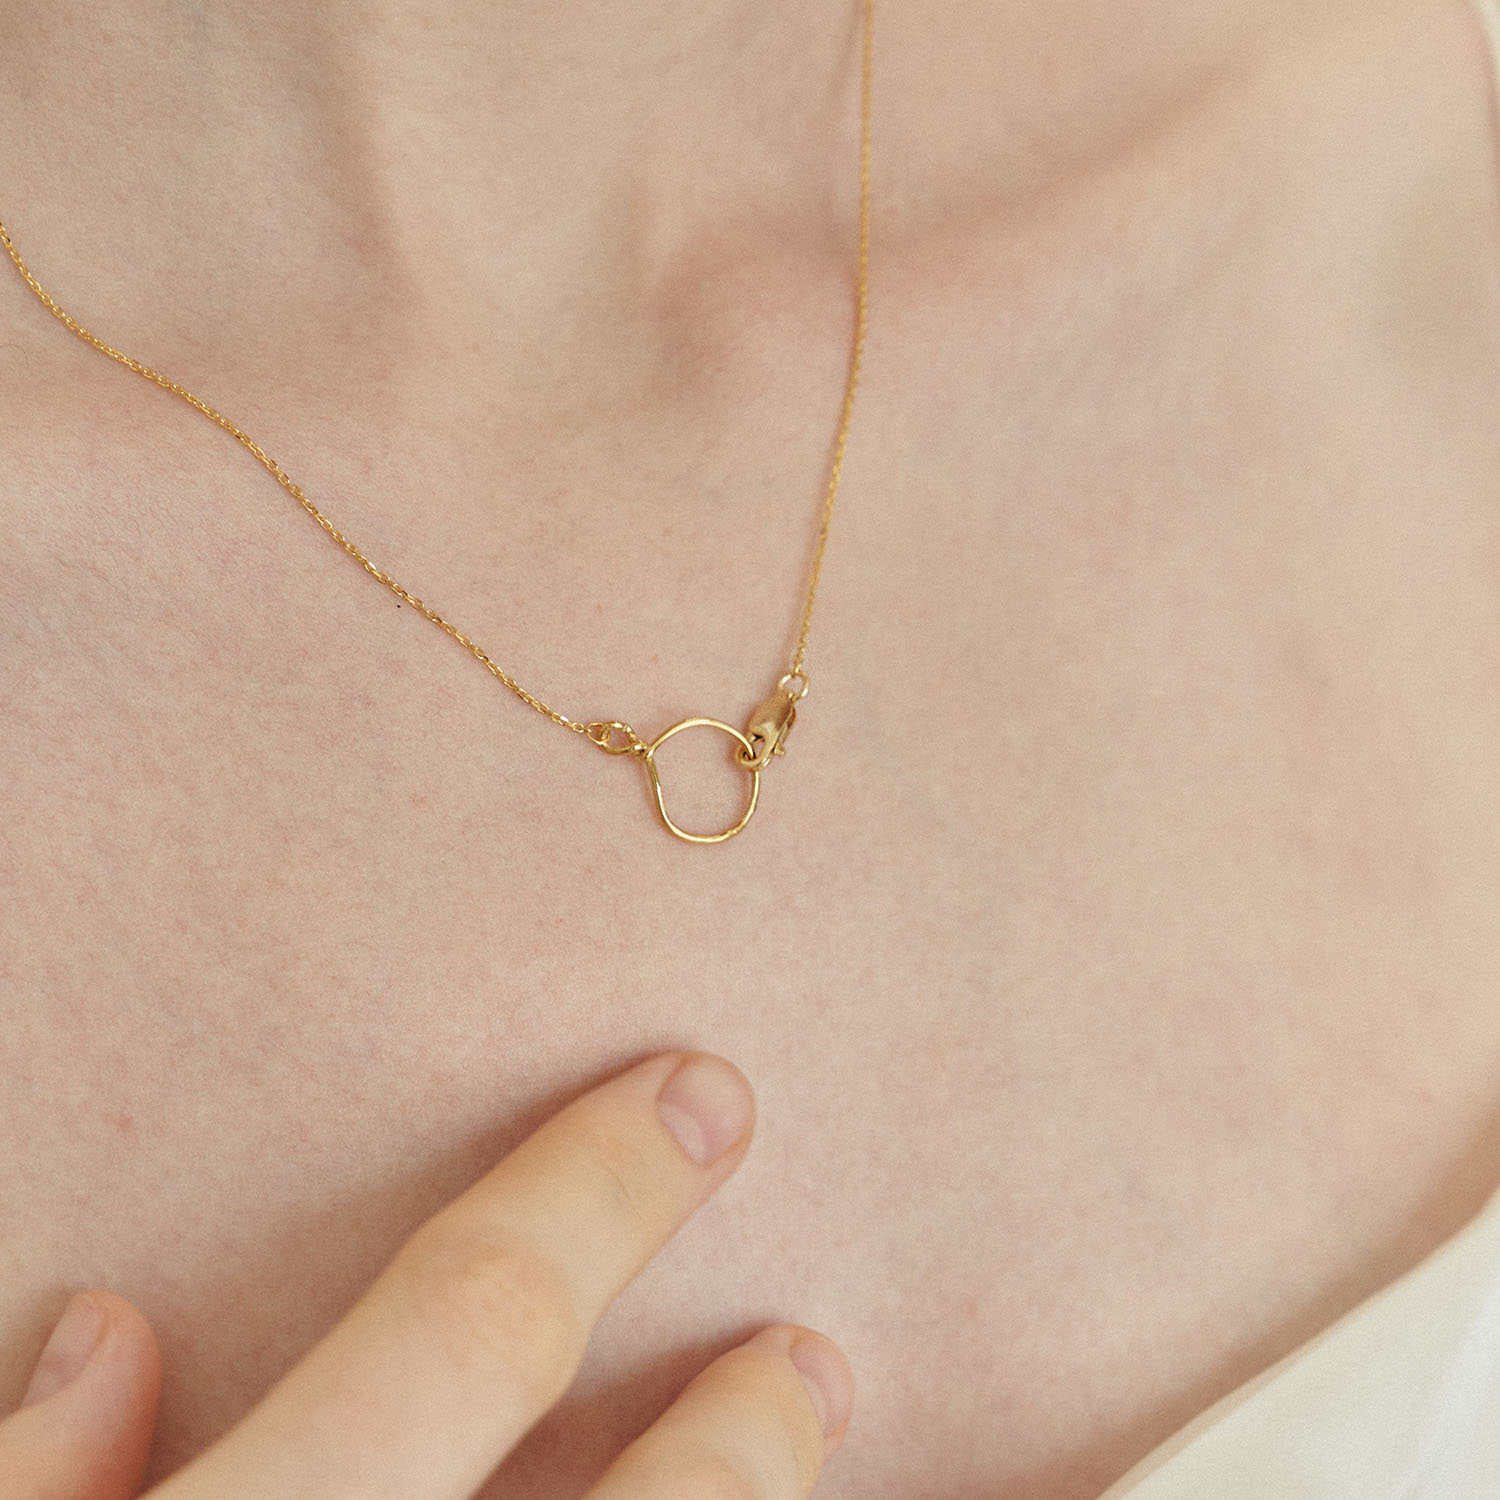 Gold ring necklace